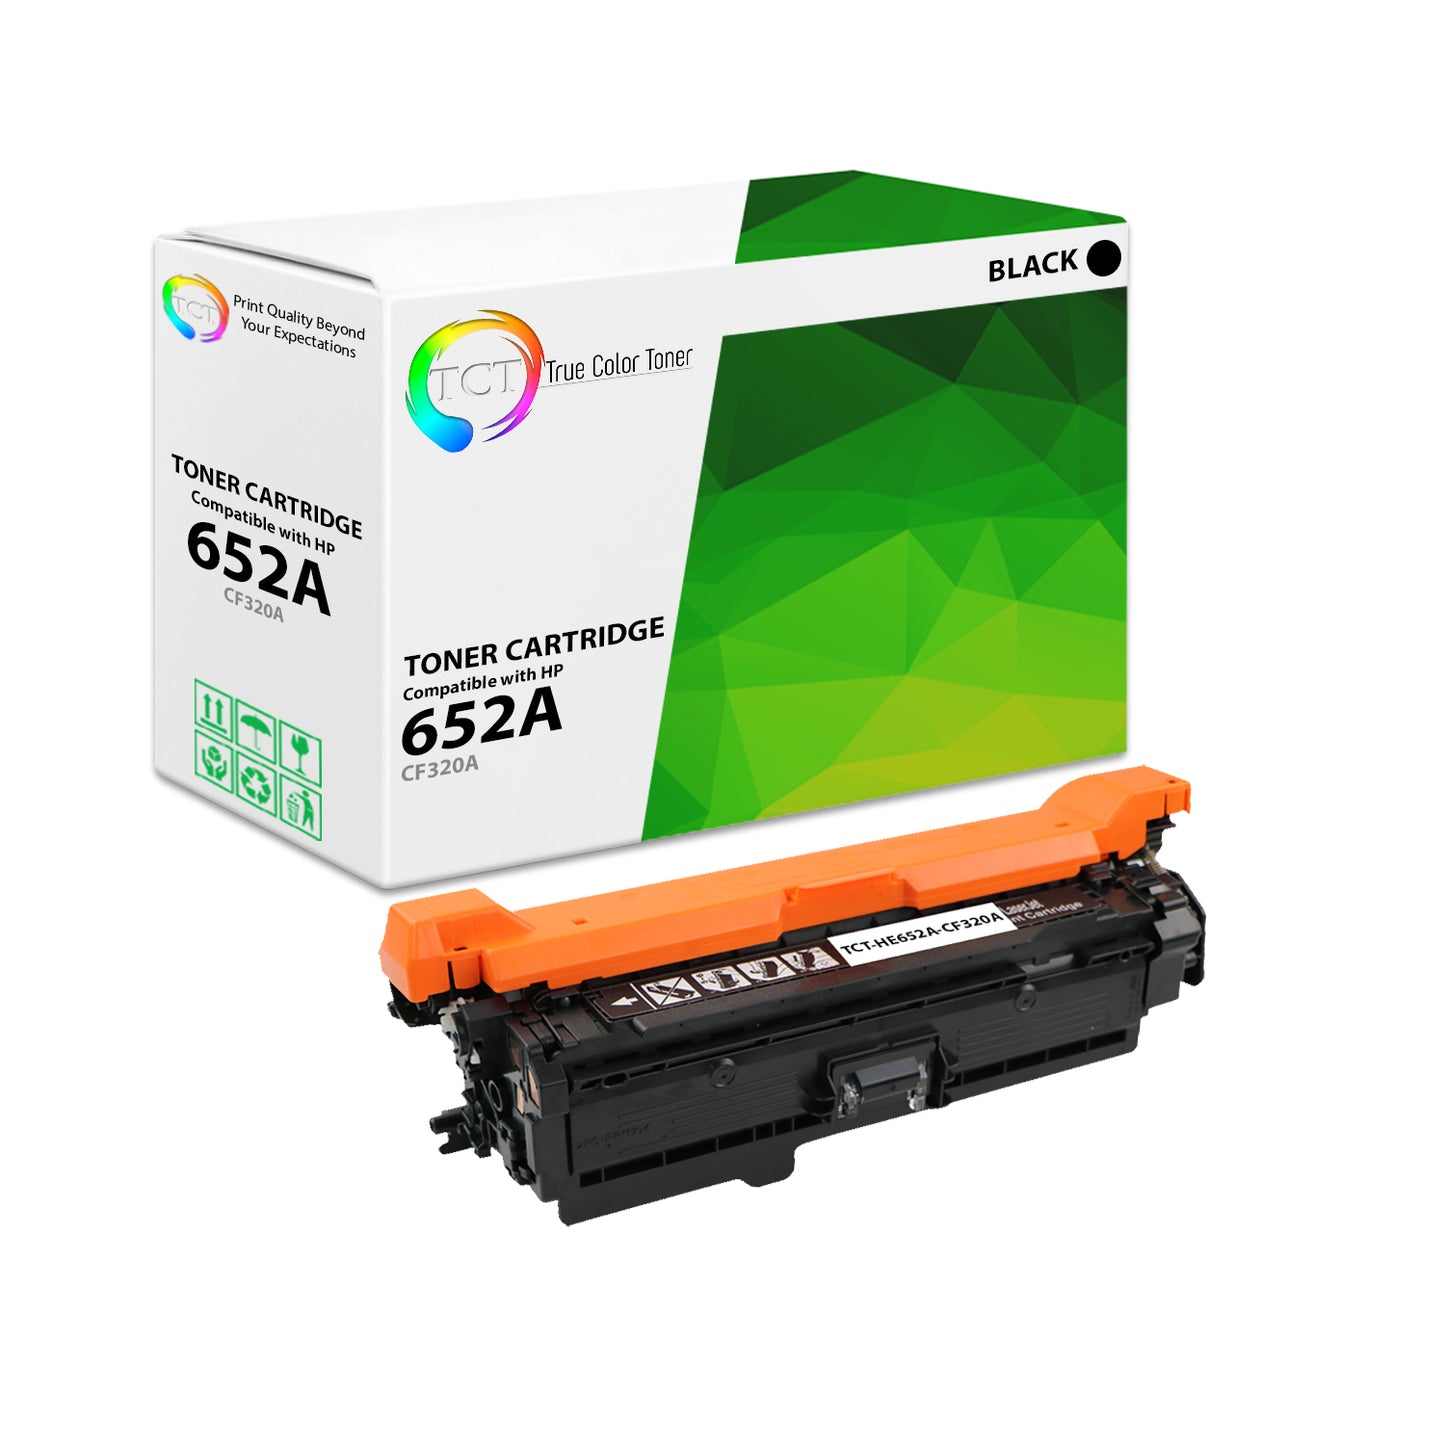 TCT Compatible Toner Cartridge Replacement for the HP 652A Series - 1 Pack Black